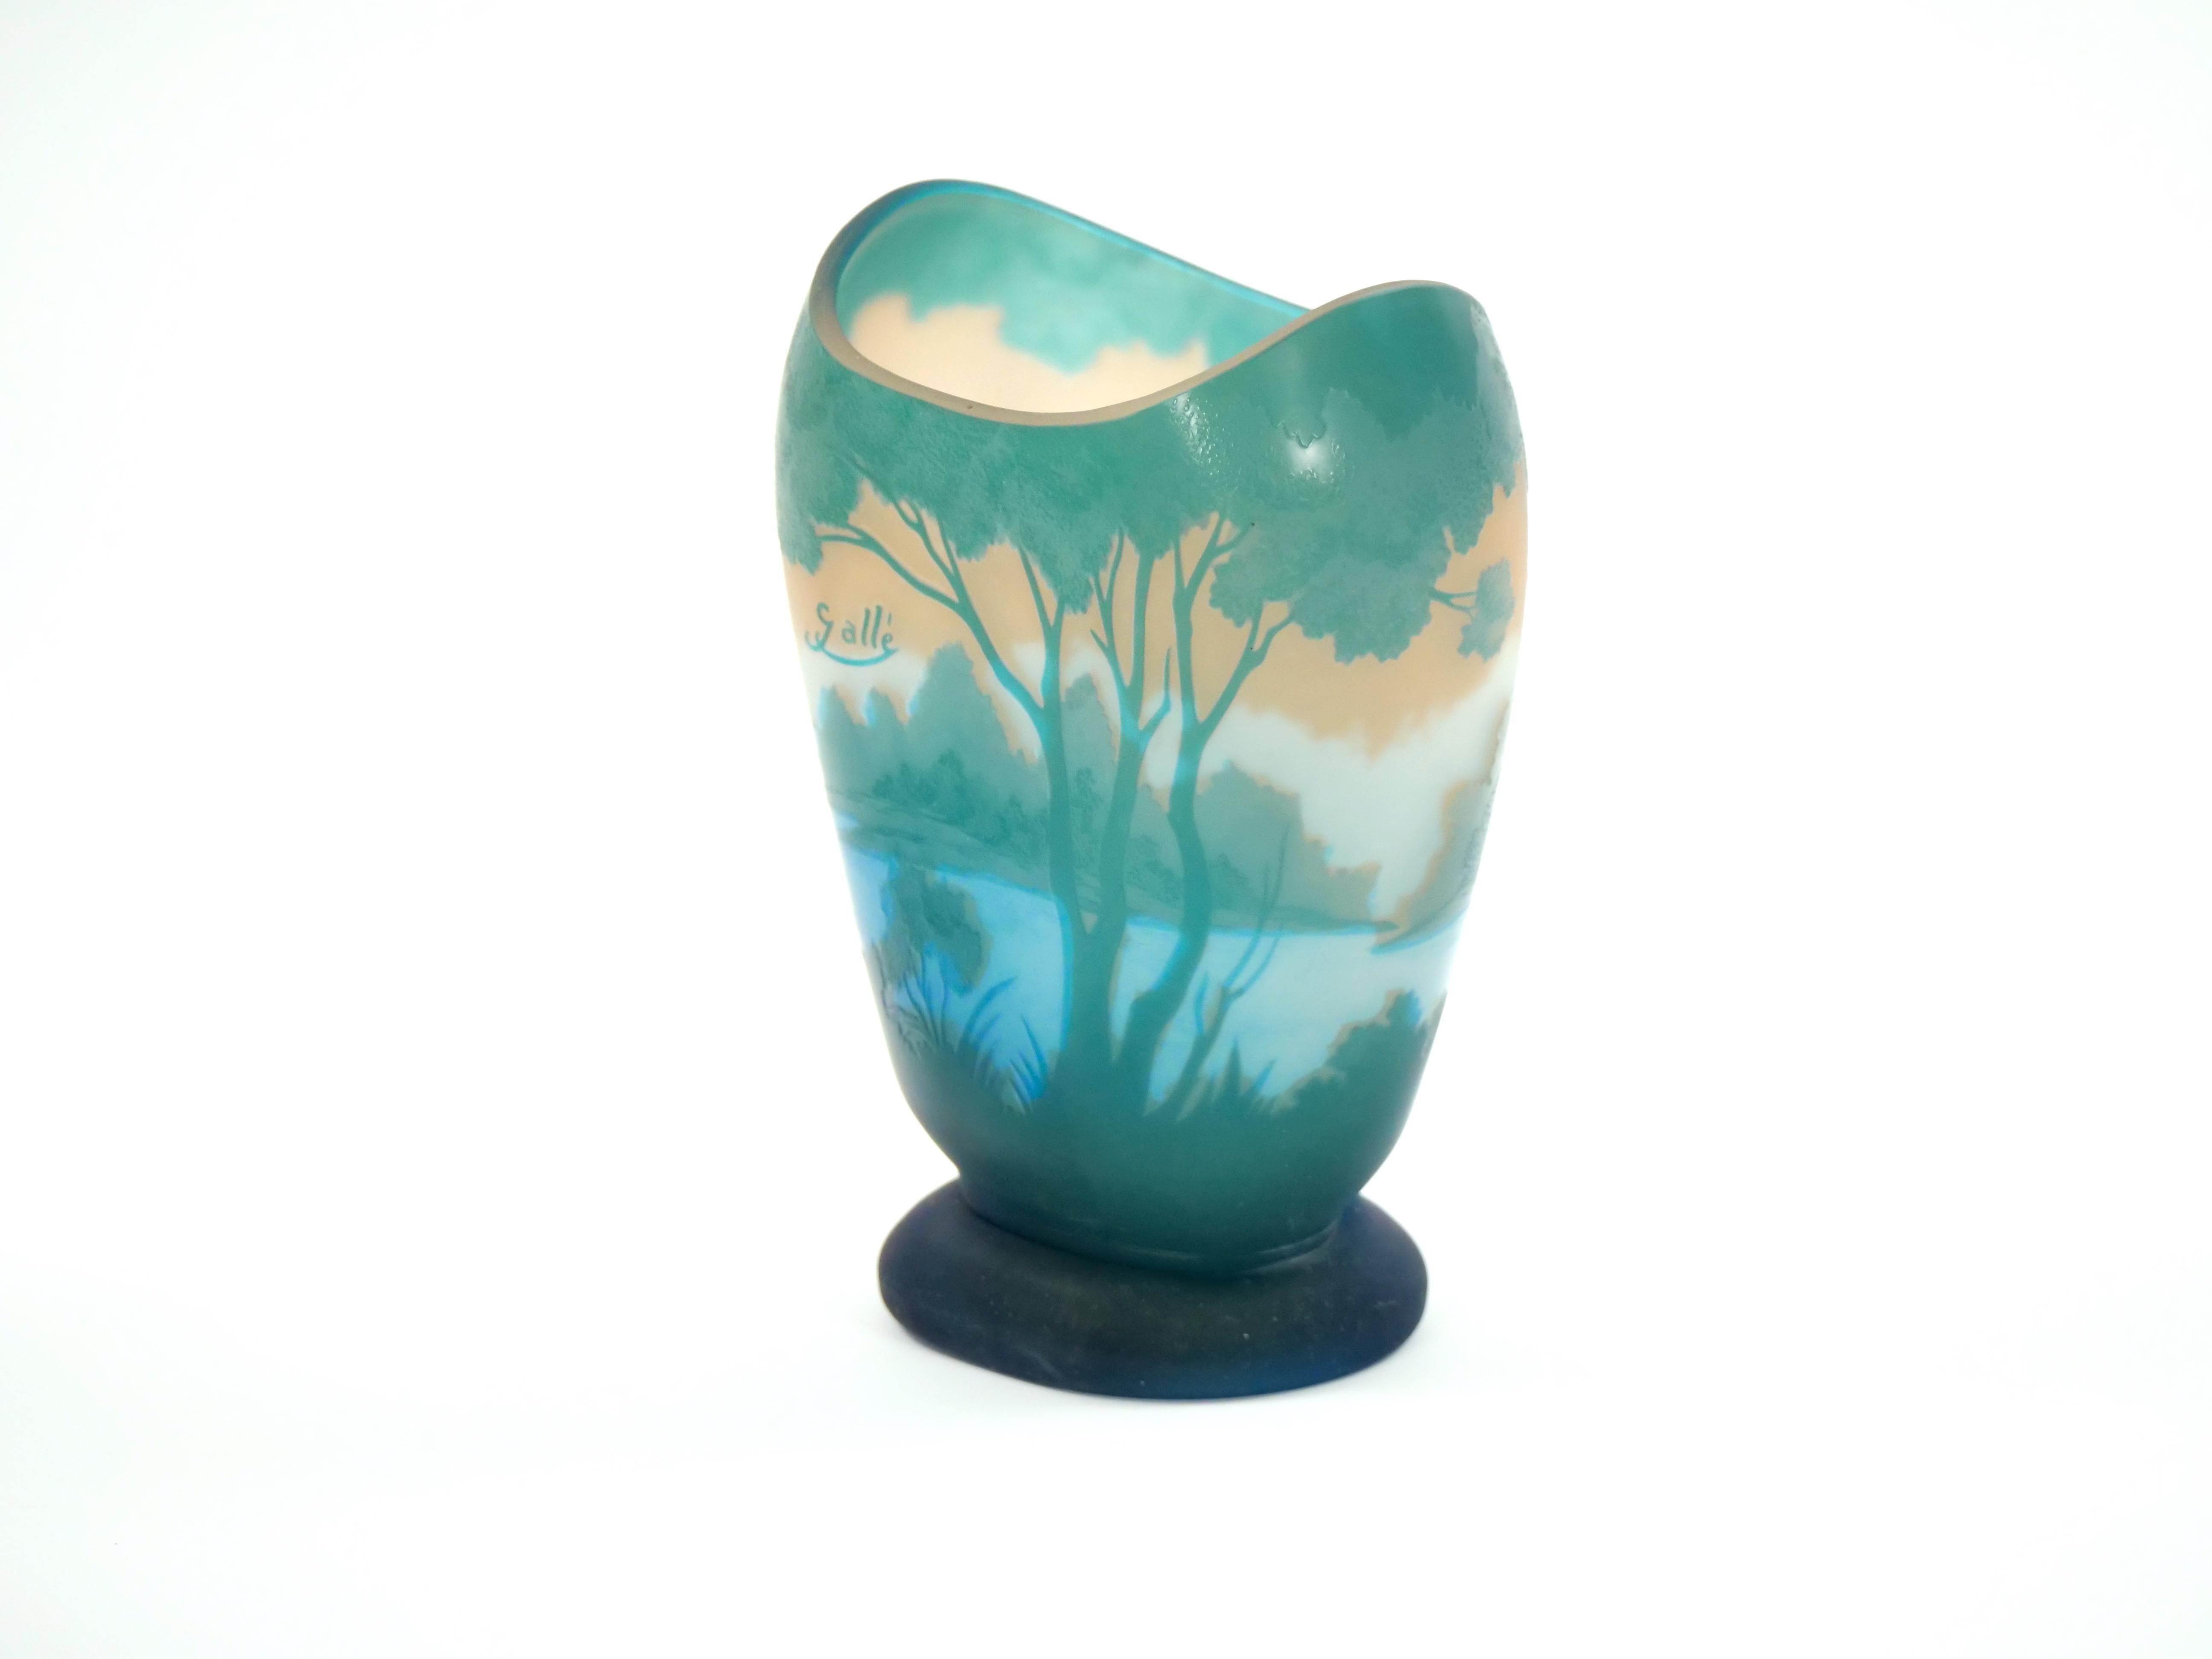 experience the beauty of nature and artistry with this exquisite Galle cameo glass vase. This masterpiece captures the serene charm of a lakeside wooded landscape, rendered in a harmonious palette of tranquil turquoise, warm tan,  and gentle light